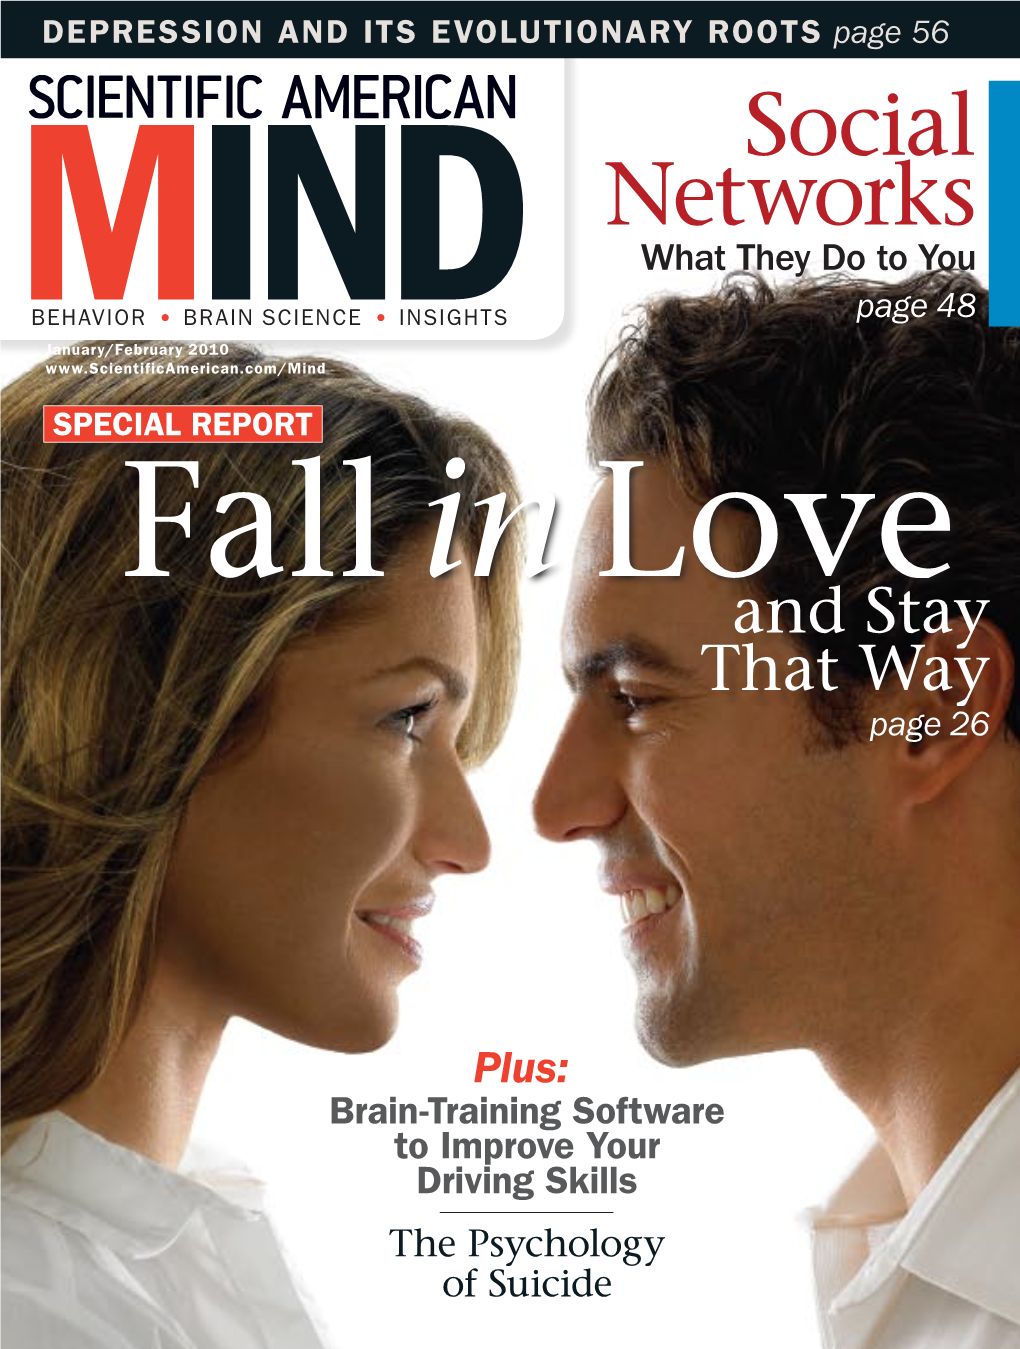 How Science Can Help You Fall in Love